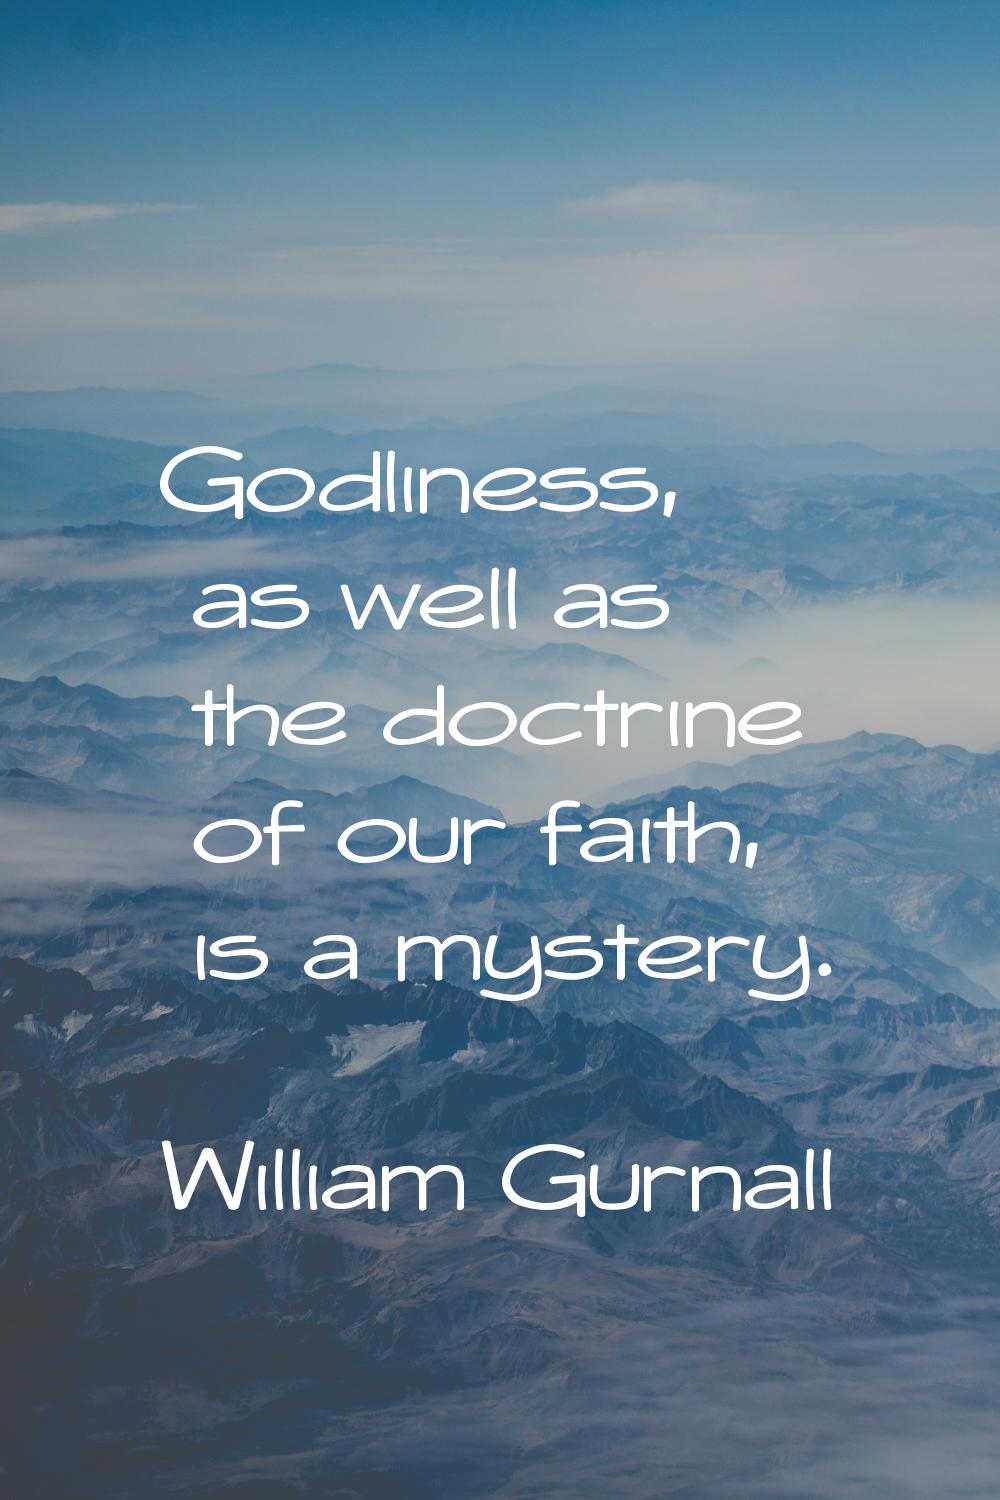 Godliness, as well as the doctrine of our faith, is a mystery.